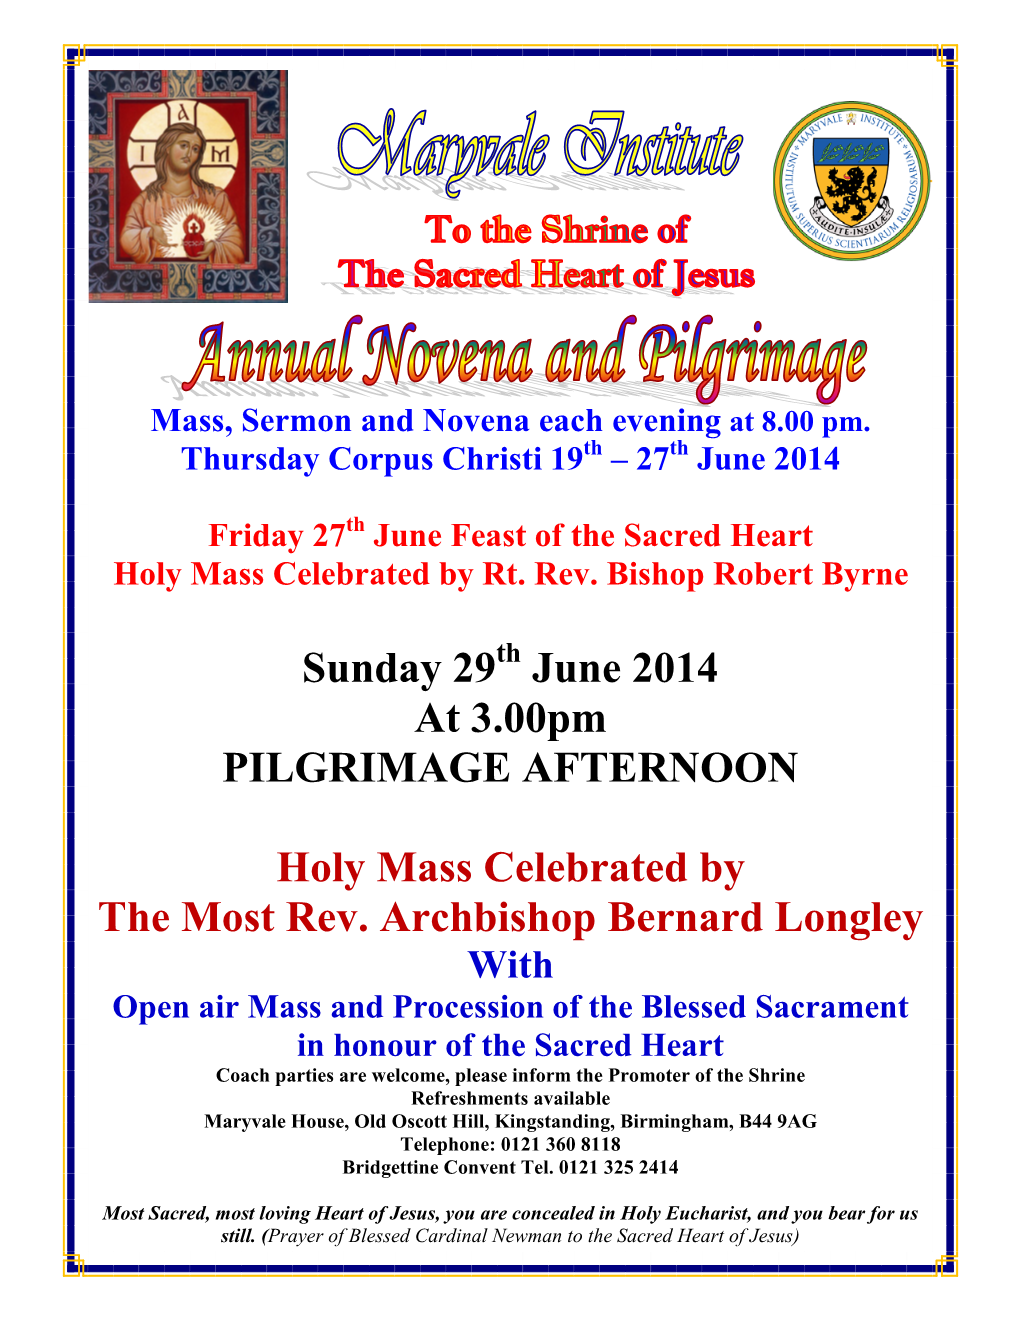 Sunday 29 June 2014 at 3.00Pm PILGRIMAGE AFTERNOON Holy